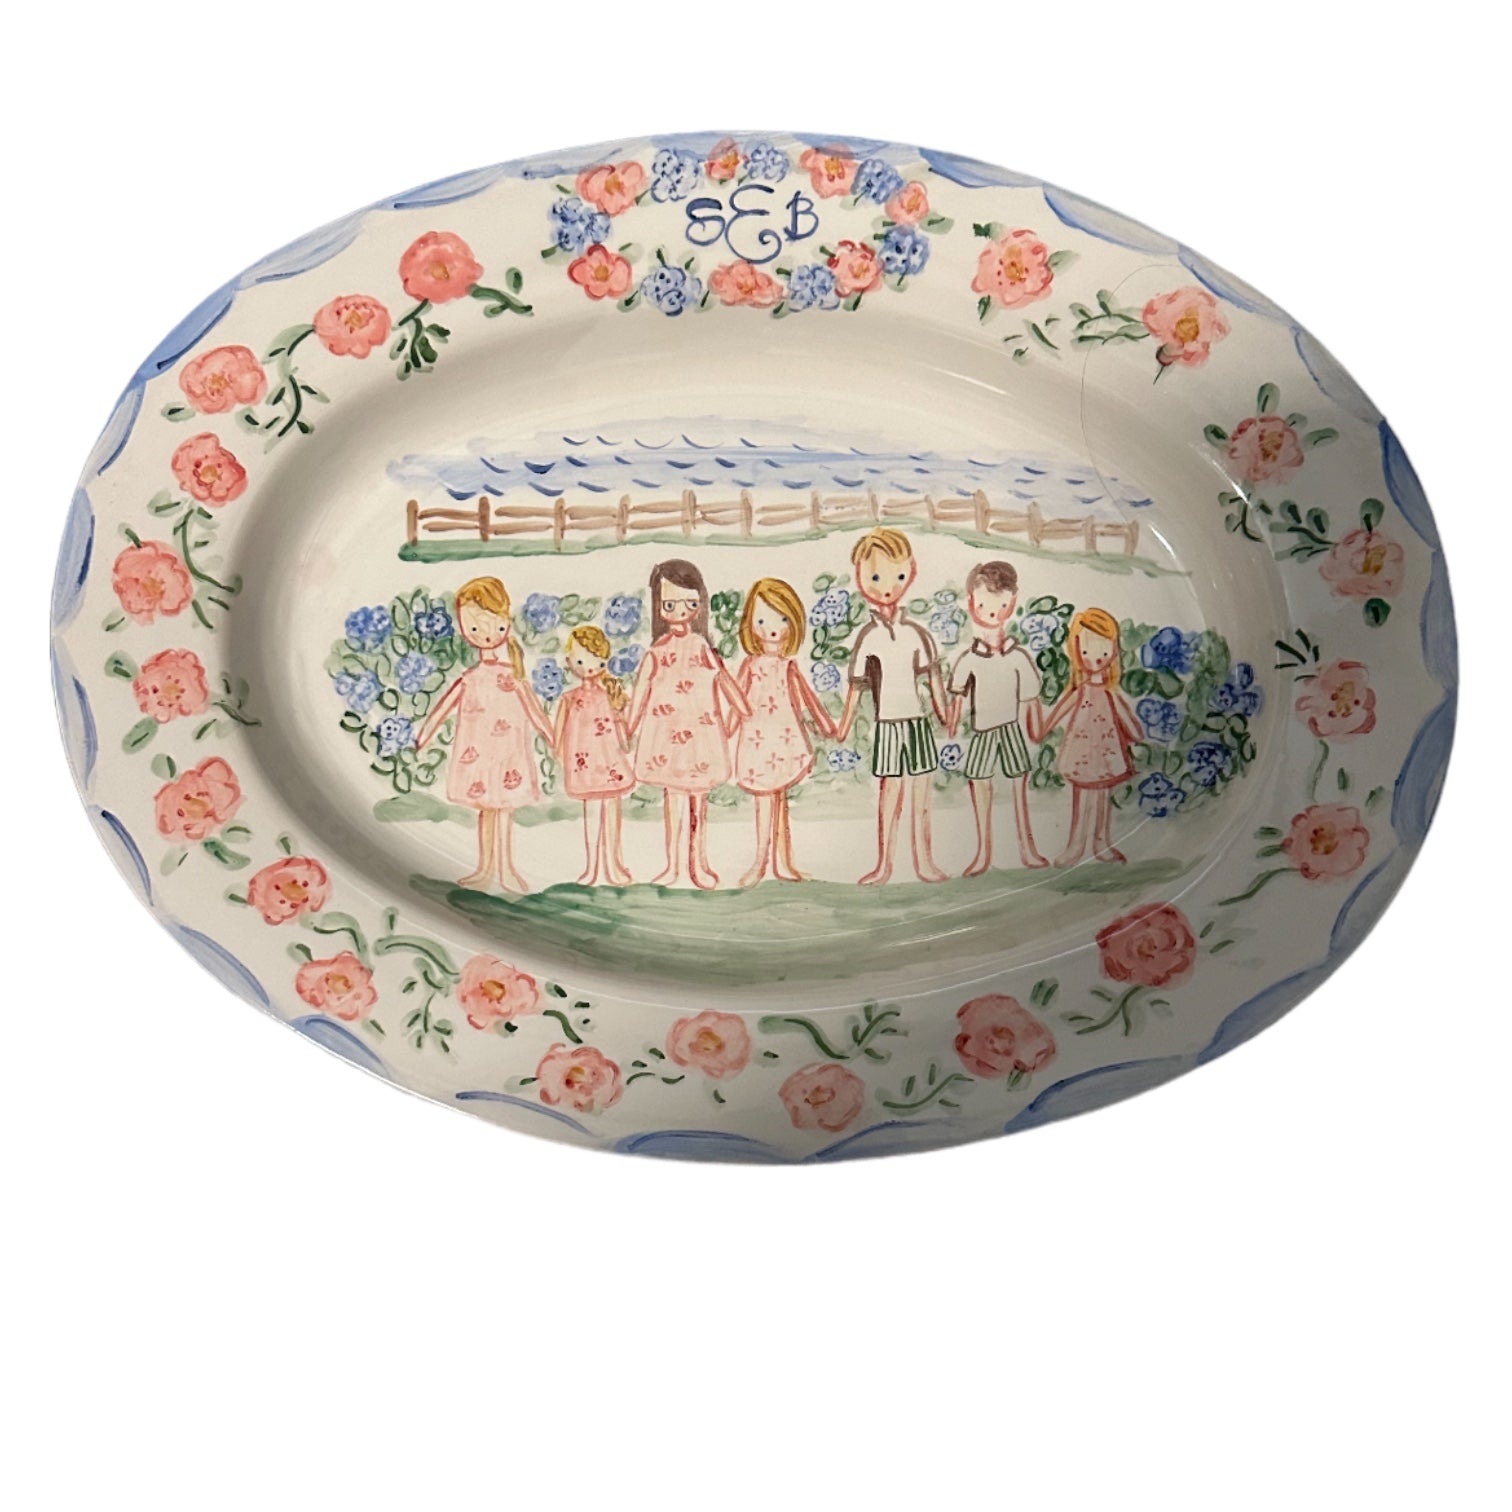 Large Custom Platter - Family and flowers - Premium Platter from Tricia Lowenfield Design 